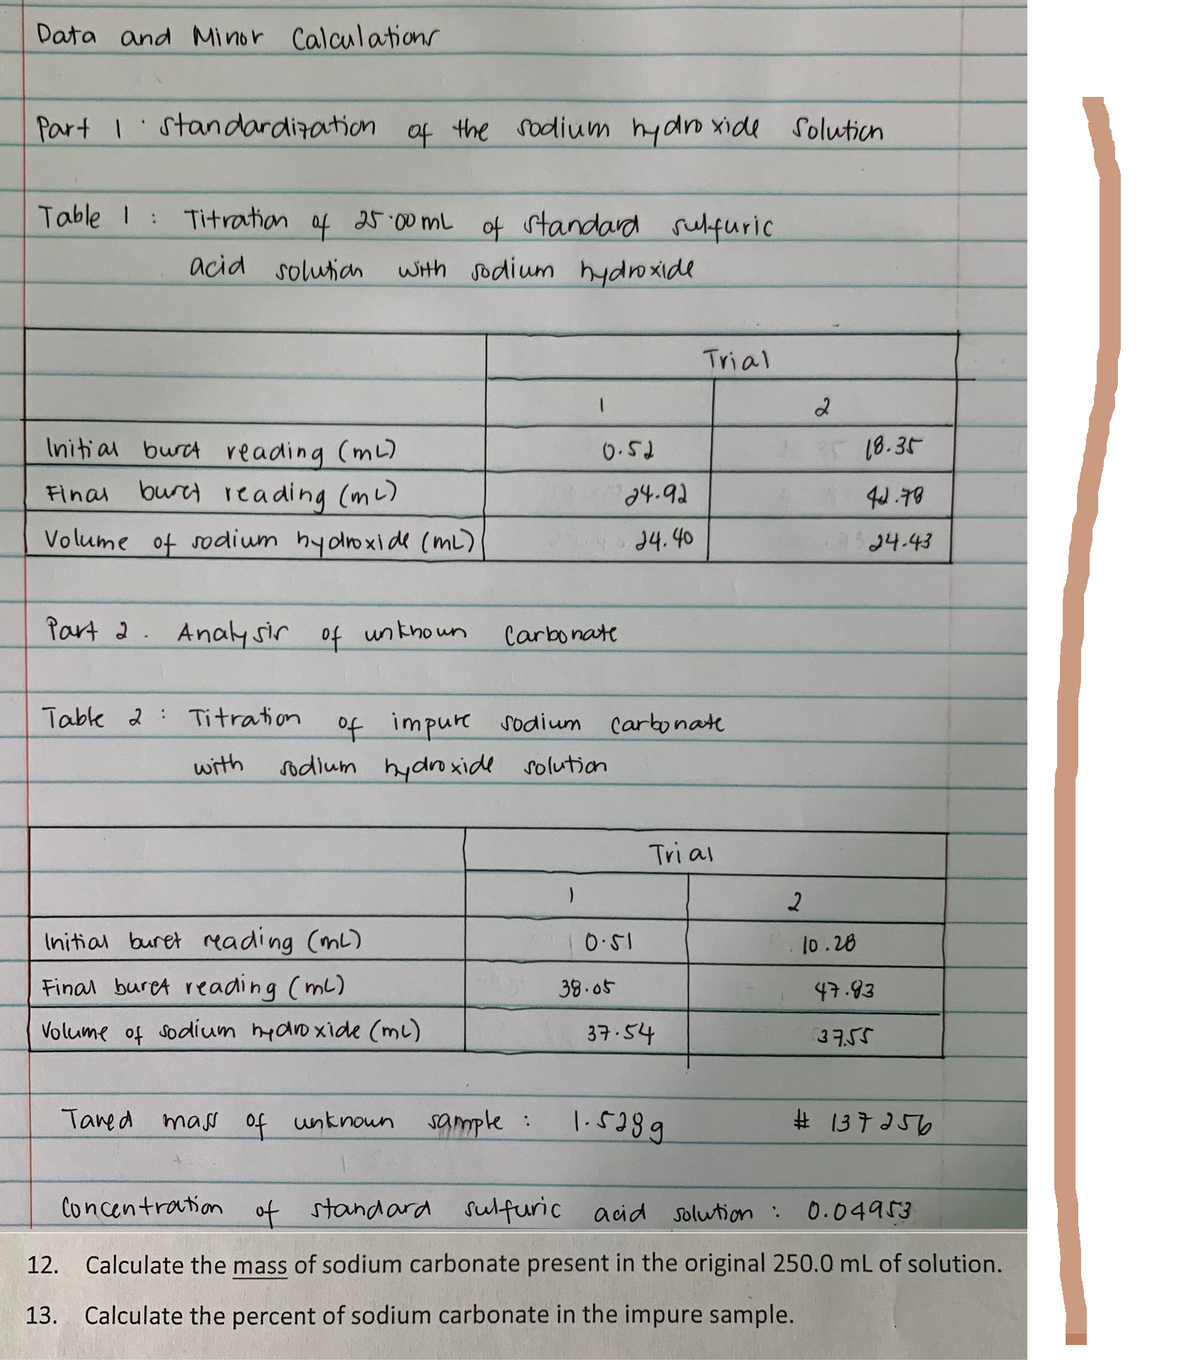 Data and Minor Calculations
Part I standardization of the sodium hydroxide
Table 1 :
Titration
of
25.00 mL
of standard sulfuric
acid solution with sodium hydroxide
Trial
Initial burc reading (ml)
0.52
Final buret reading (m²)
Volume of sodium hydroxide (ML)
Part 2. Analysir of unknown
Table 2 Titration
with
Initial buret reading (ml)
Final buret reading (ml)
47.83
Volume of sodium hydroxide (ml)
37.54
37.55
Tared mass of unknown
sample :
1.5289
#137256
Concentration of standard sulfuric acid solution :
0.04953
12. Calculate the mass of sodium carbonate present in the original 250.0 mL of solution.
13. Calculate the percent of sodium carbonate in the impure sample.
24-92
24.40
Carbonate
of impure sodium carbonate
Tri al
sodium hydroxide solution
10.51
38.05
Solution
2
2
25 18.35
44.78
24.43
10.28